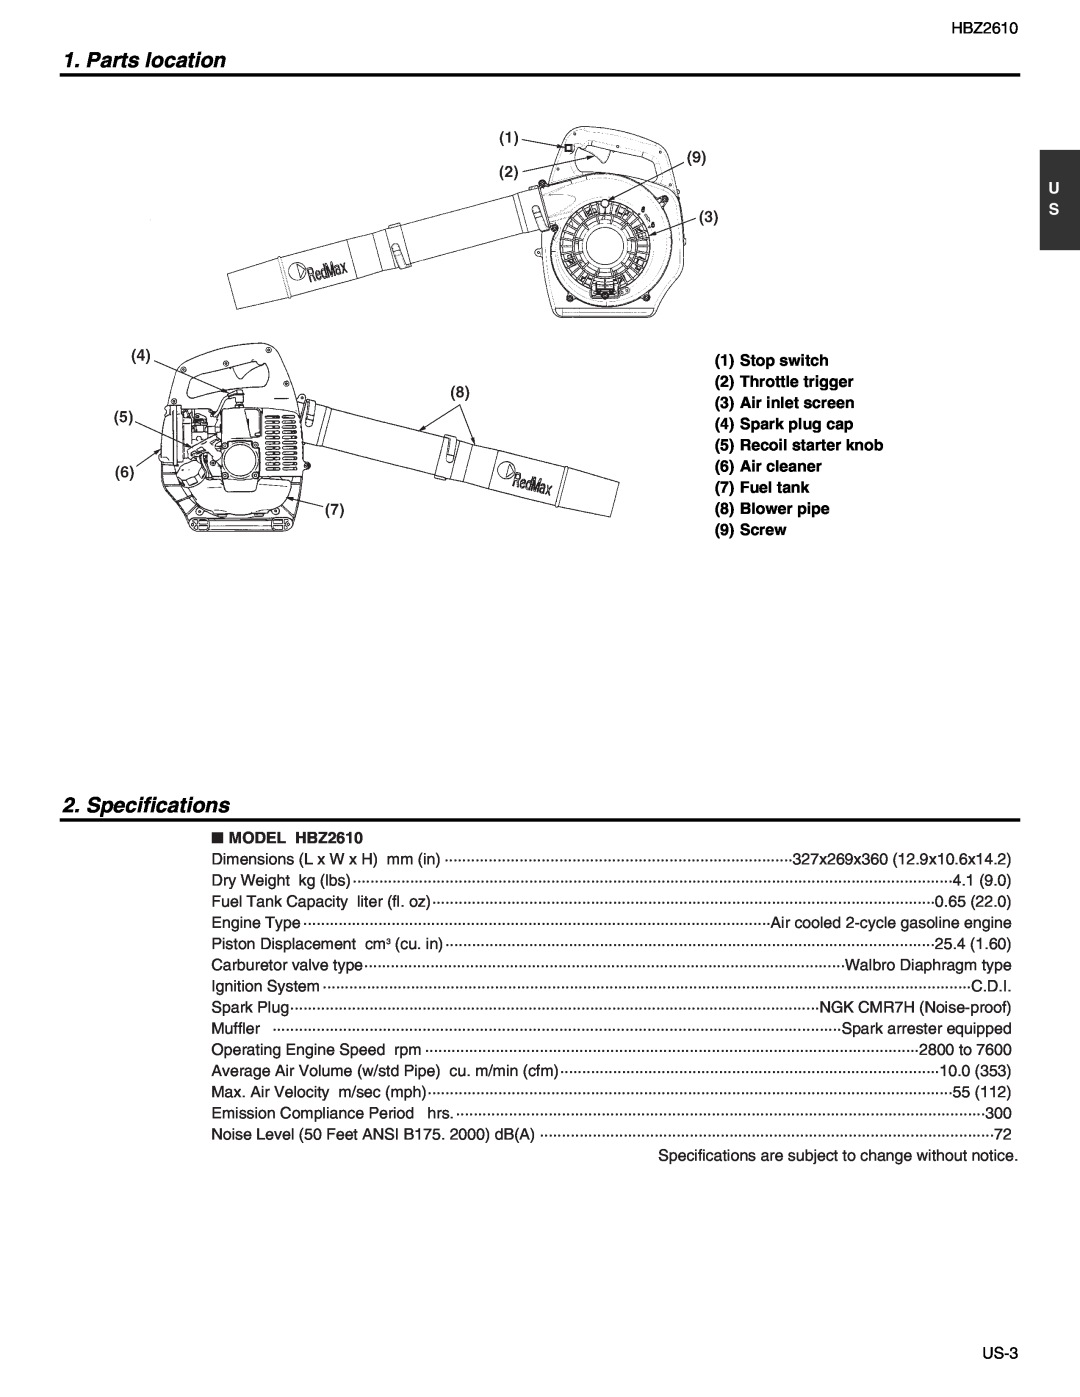 RedMax HBZ2610 manual Parts location, Specifications 